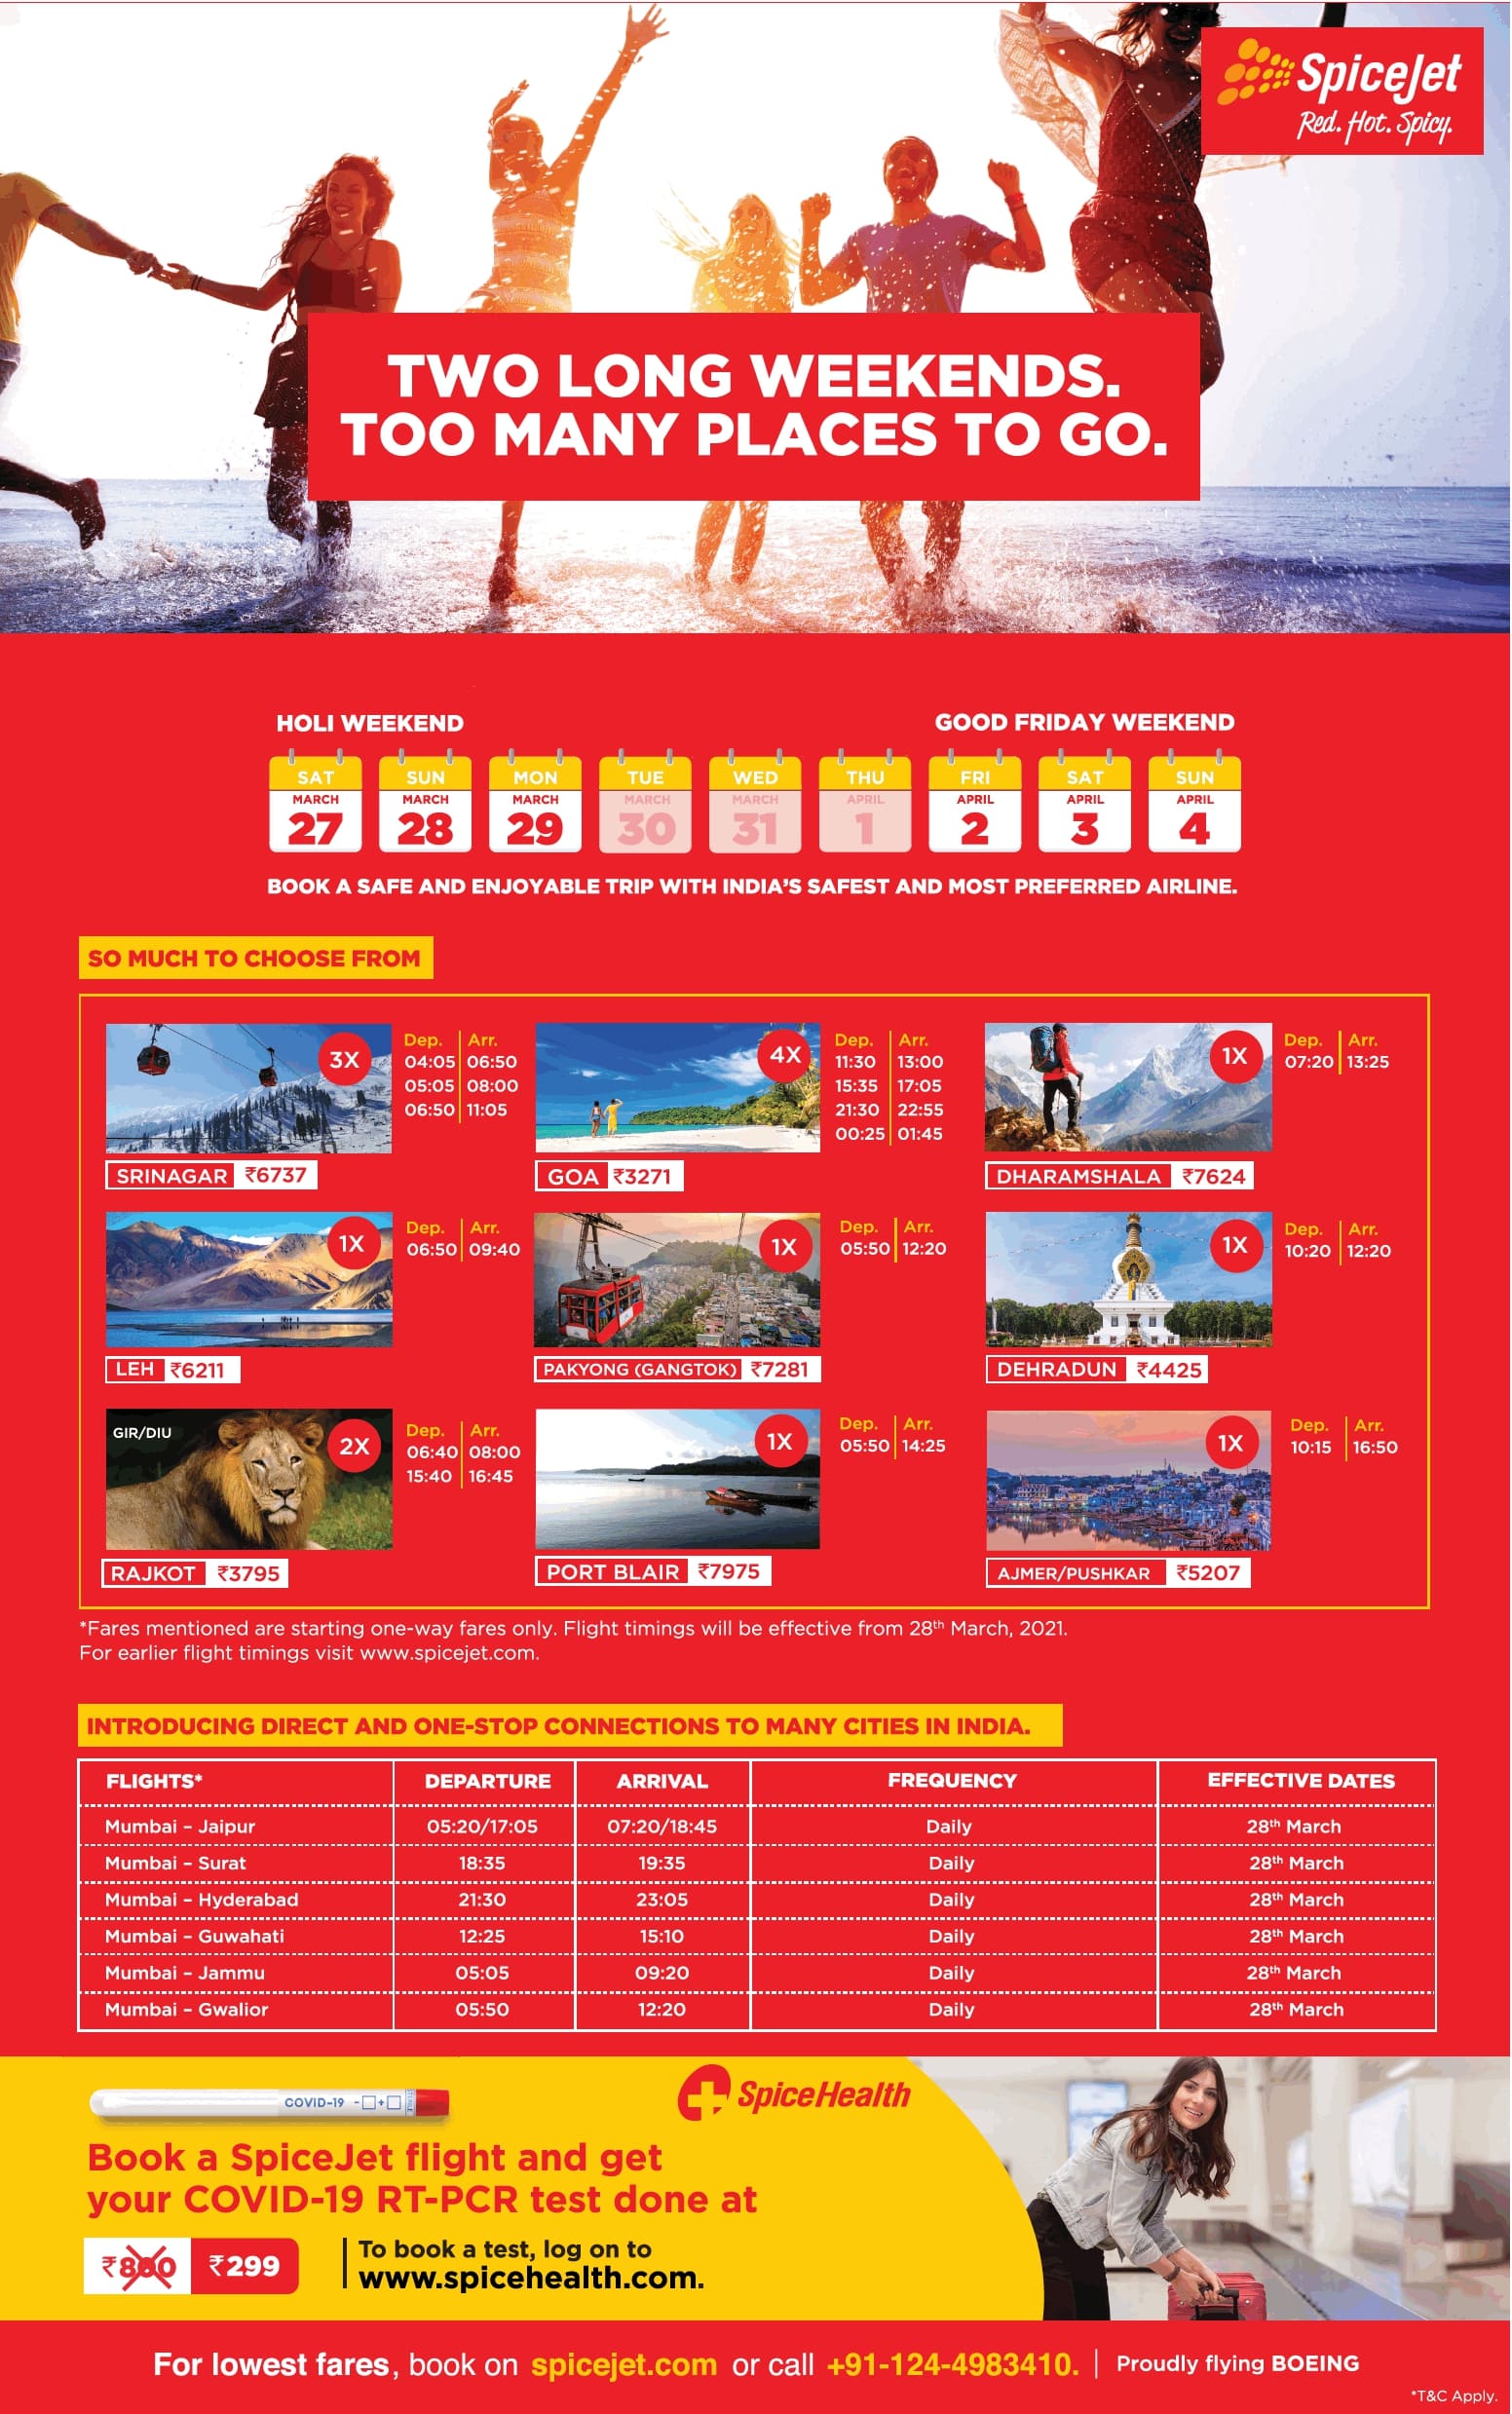 spicejet-two-long-weekends-too-many-places-to-go-ad-times-of-india-mumbai-18-03-2021